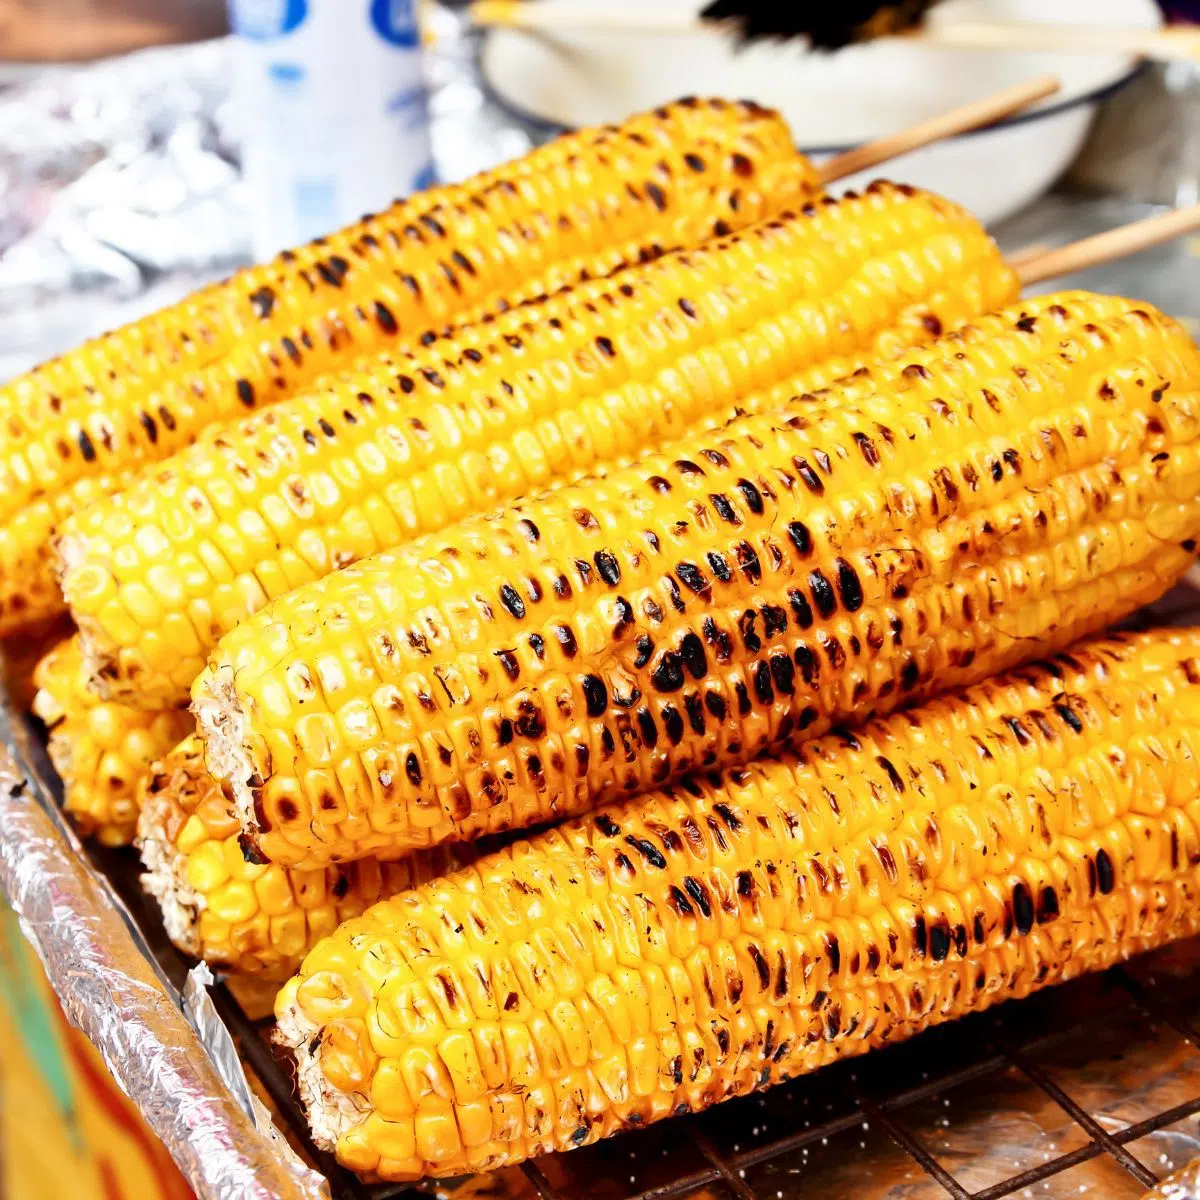 Square image of grilled corn on the cob stacked with wooden skewers.